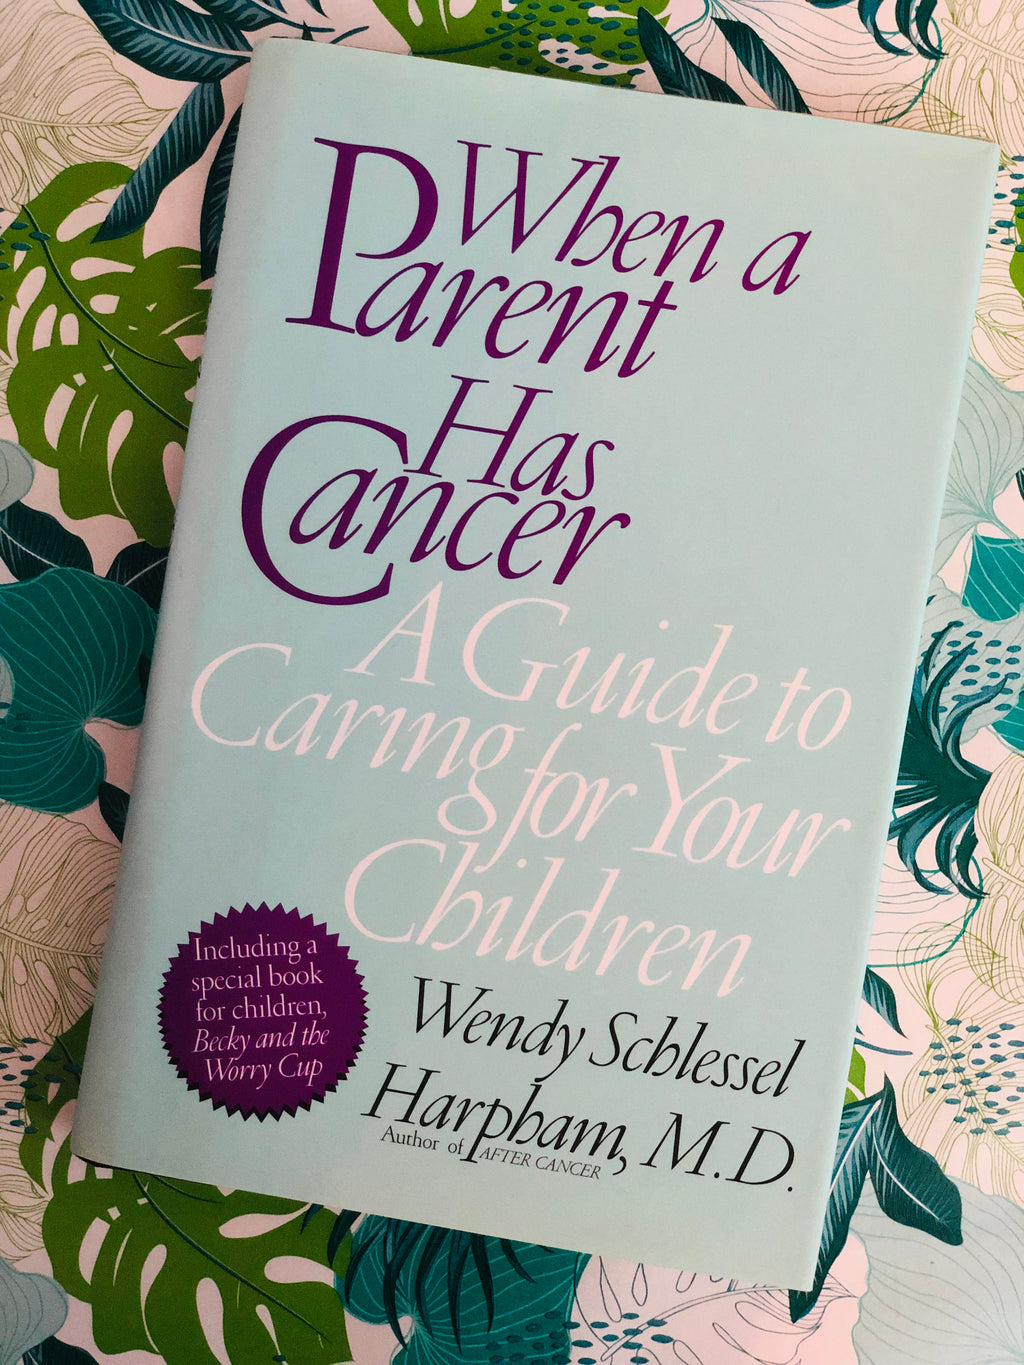 When A Parent Has Cancer: A Guide For Caring For Your Children- By Wendy Schlessel Harpham, M.D